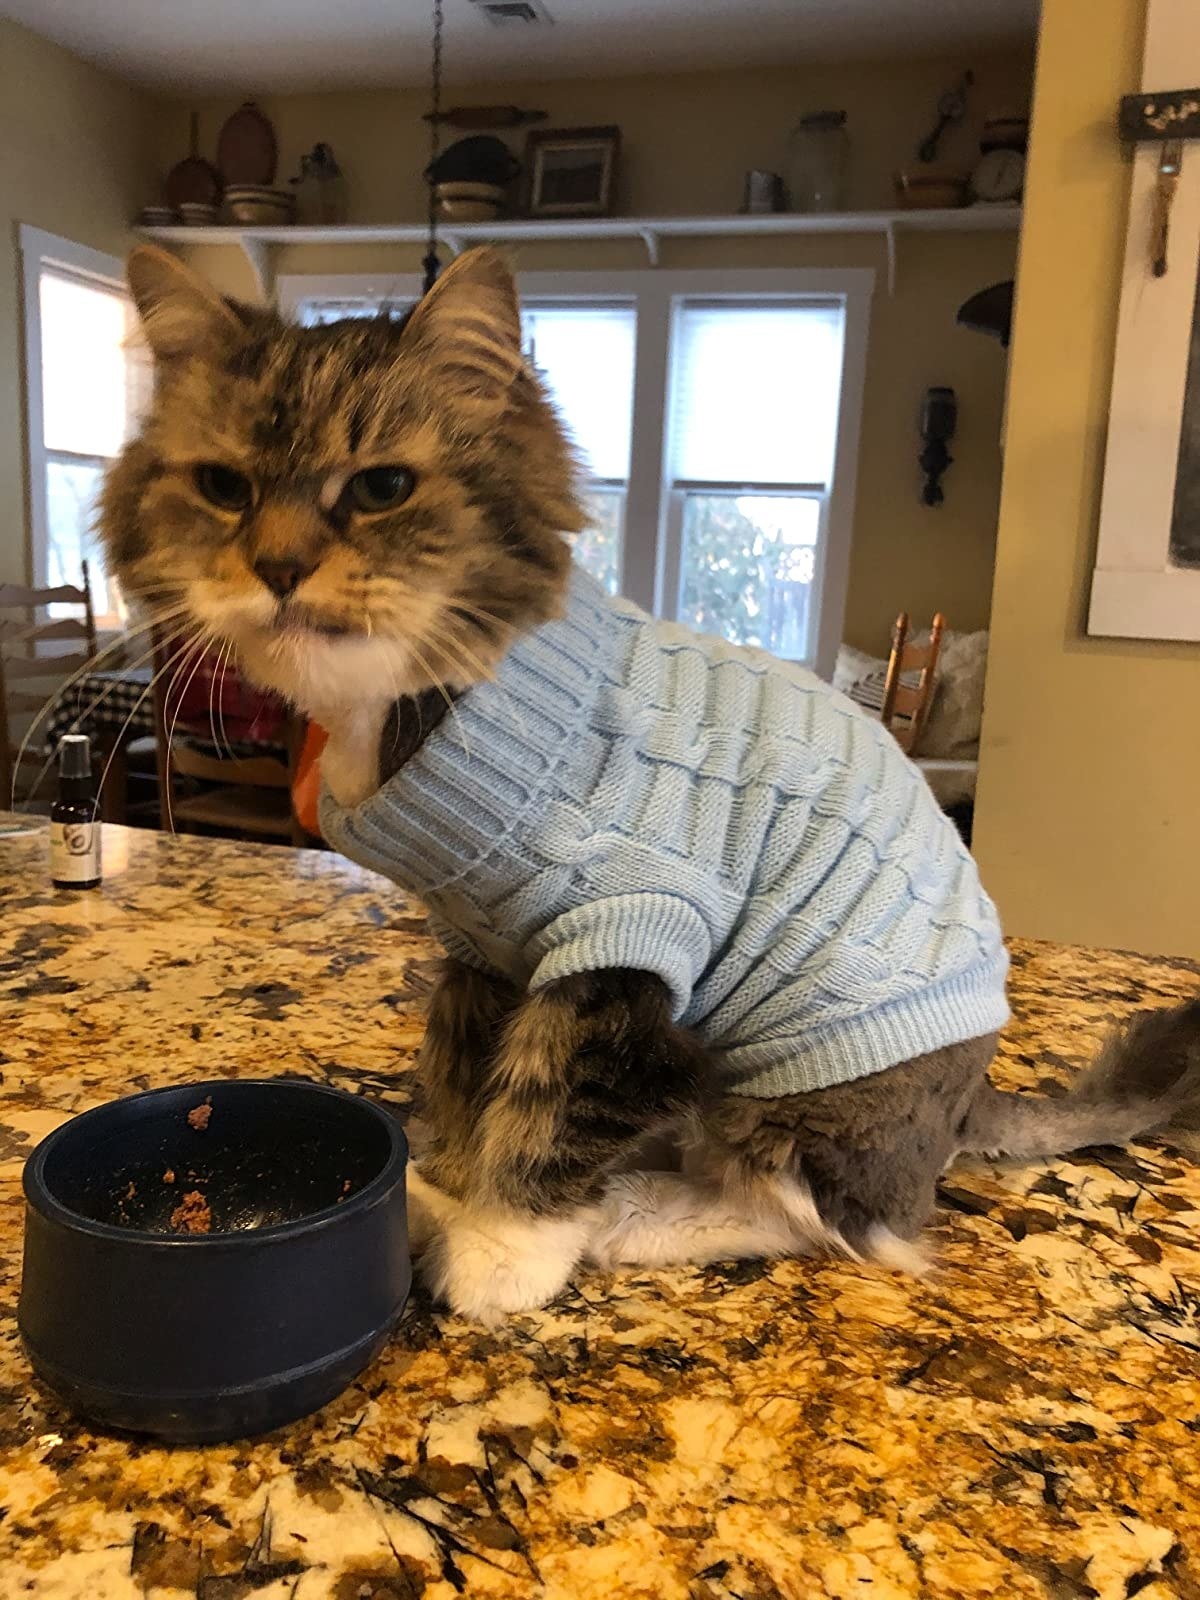 Review photo of cat wearing the blue sweater